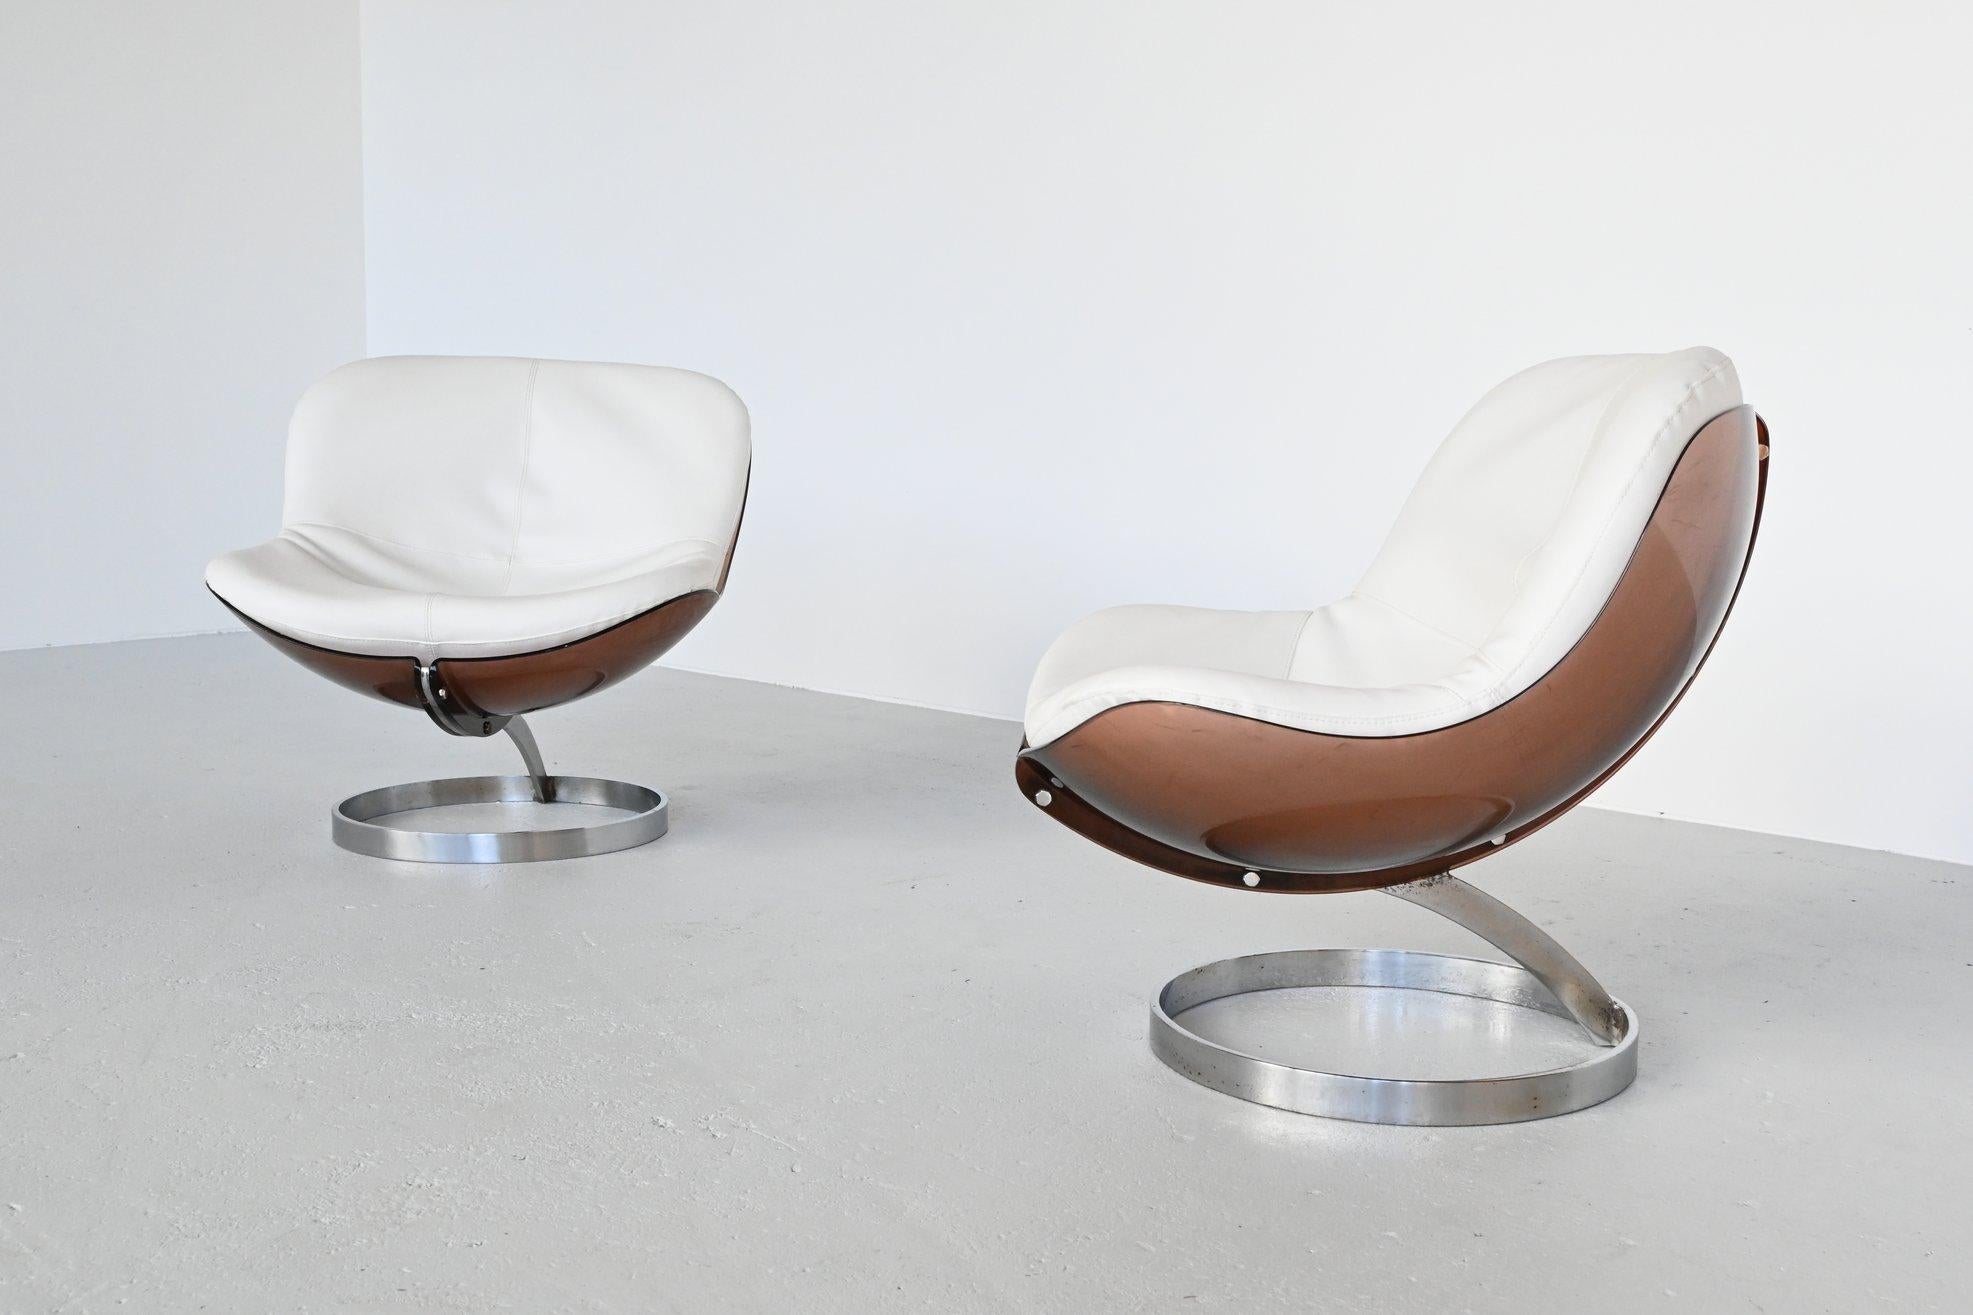 Amazing set of 2 Sphere chairs designed by Boris Tabacoff and manufactured by Mobilier Modulair Moderne, France, 1971. These lounge chairs have a chrome plated metal iconic base and a lightly smoked moulded plexiglass seat with white faux leather